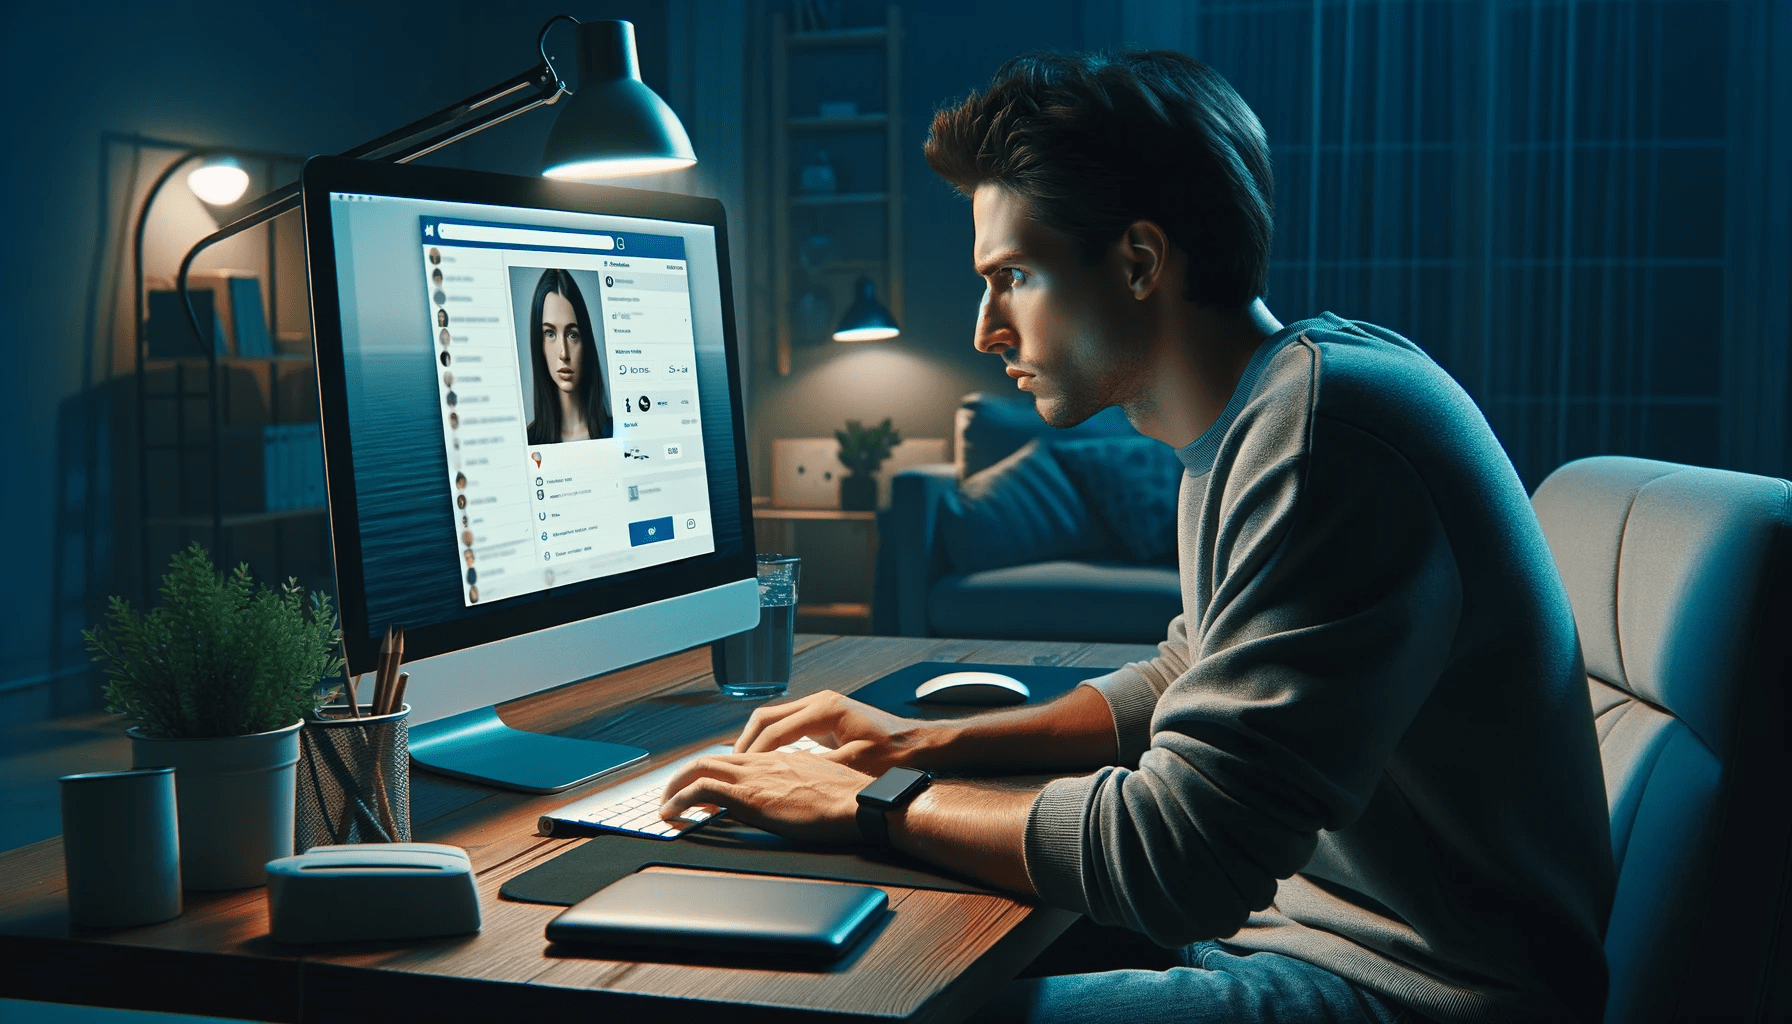 A young Caucasian man sits in front of a computer screen displaying a social media profile of a woman. The